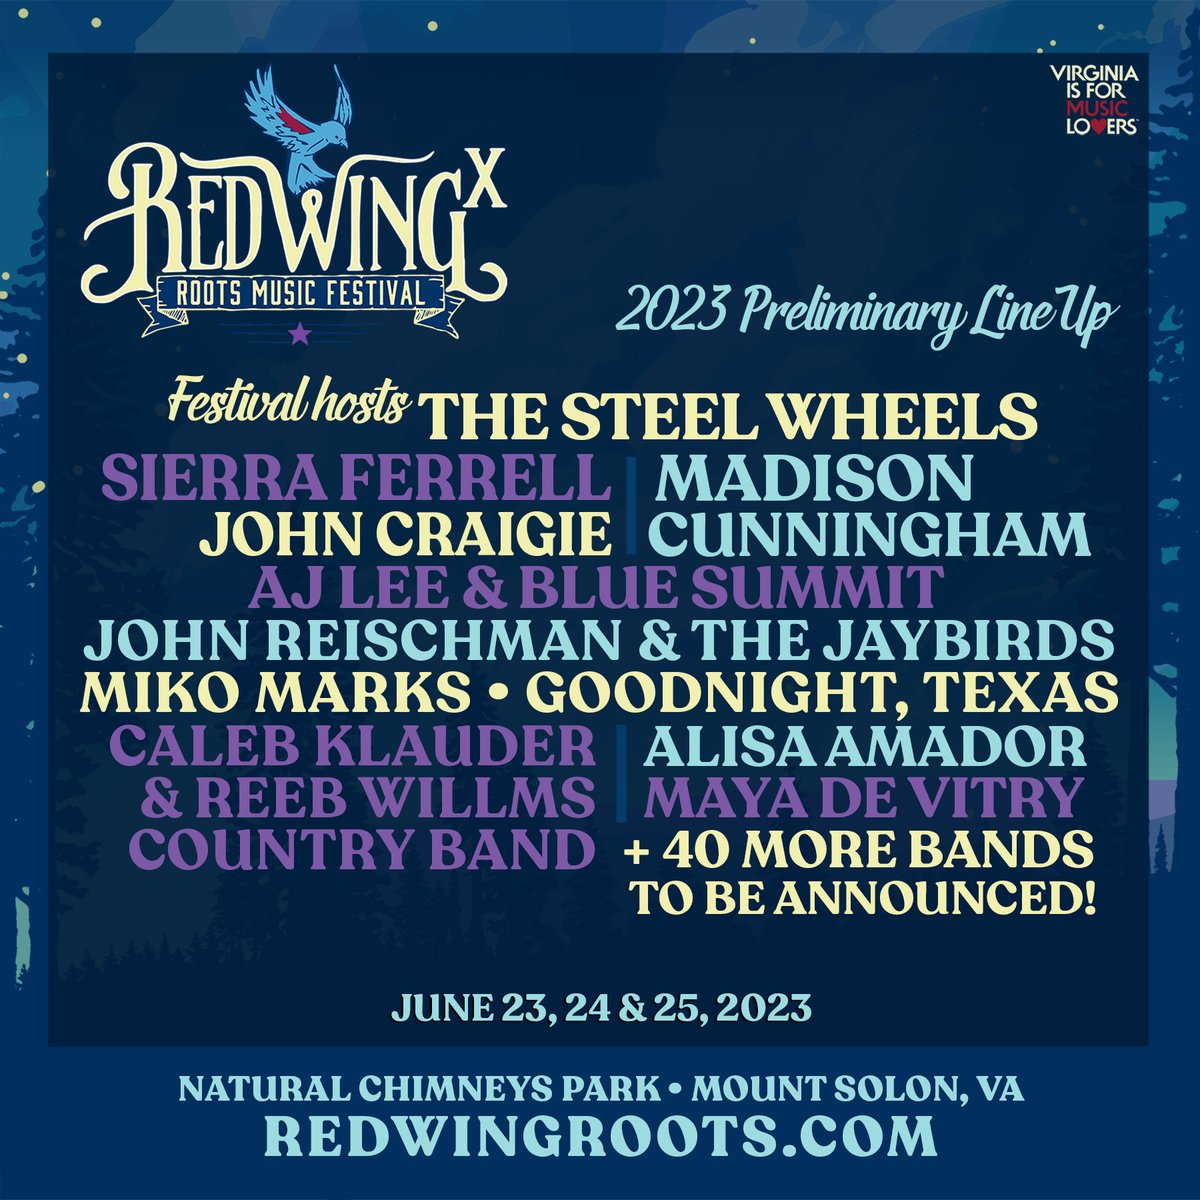 Along w/ festival hosts @thesteelwheels we're excited to share the first bands in our 2023 line up! Stay tuned, full line up to be announced soon! Tix + camping on sale now: bit.ly/RW10tix #redwingroots #redwingroots2023 #loveva #vamusic #visitvirginia @VisitVirginia